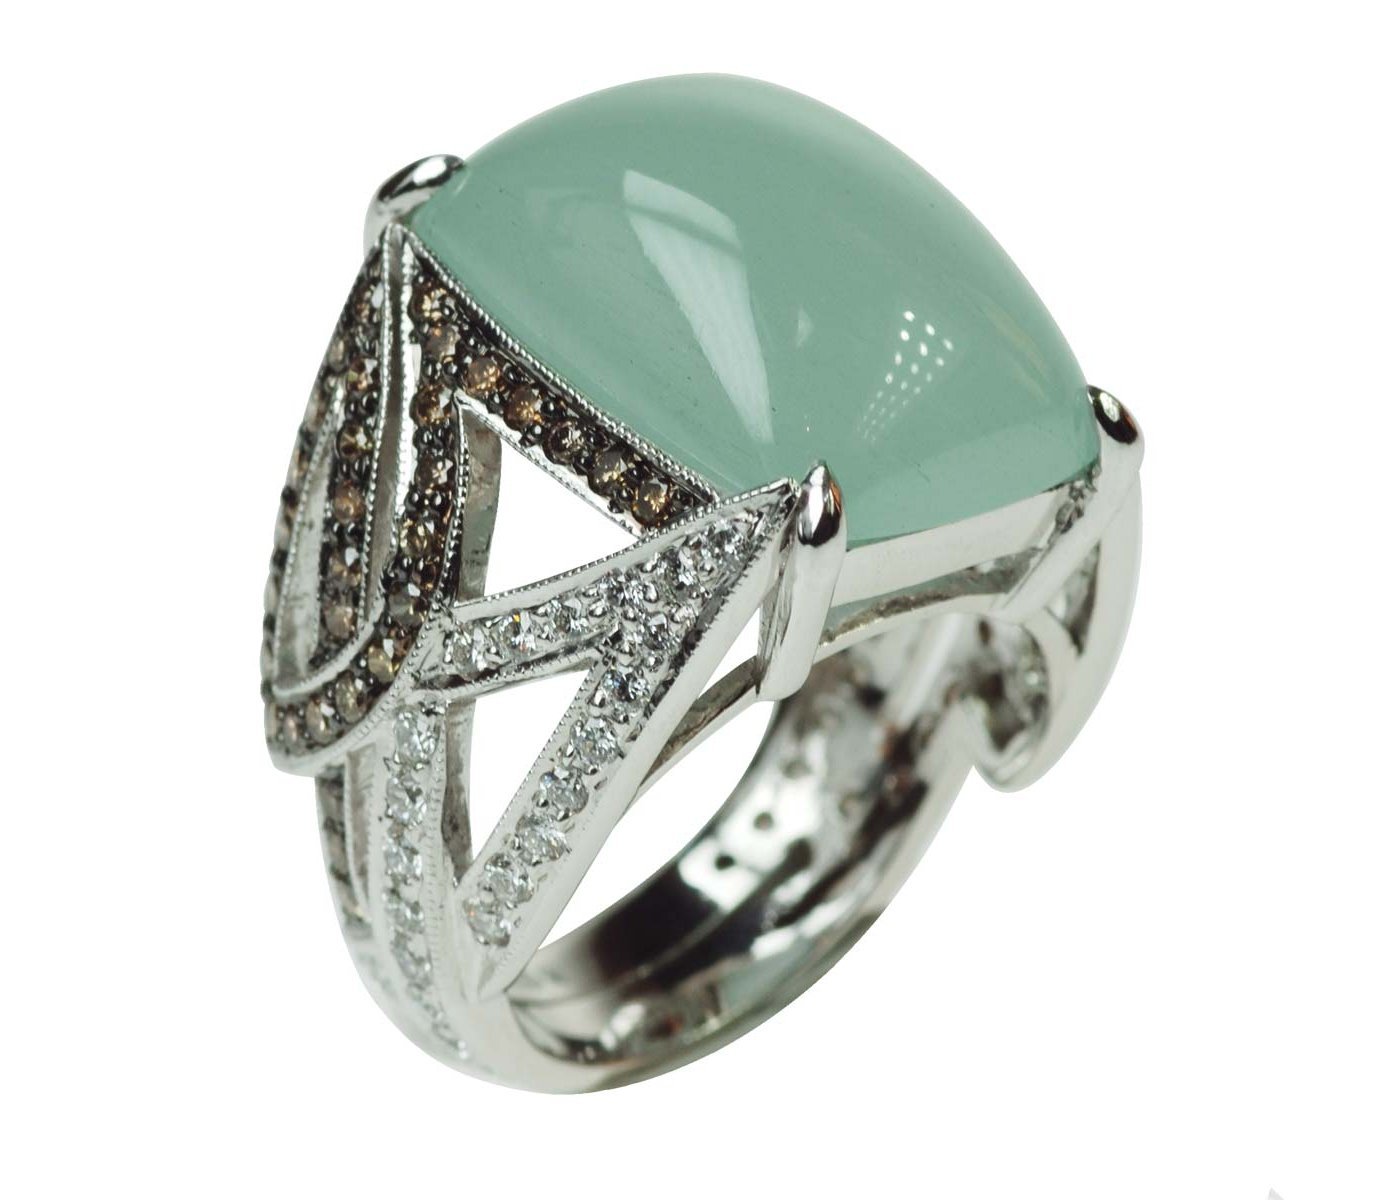 Ring by Kavant